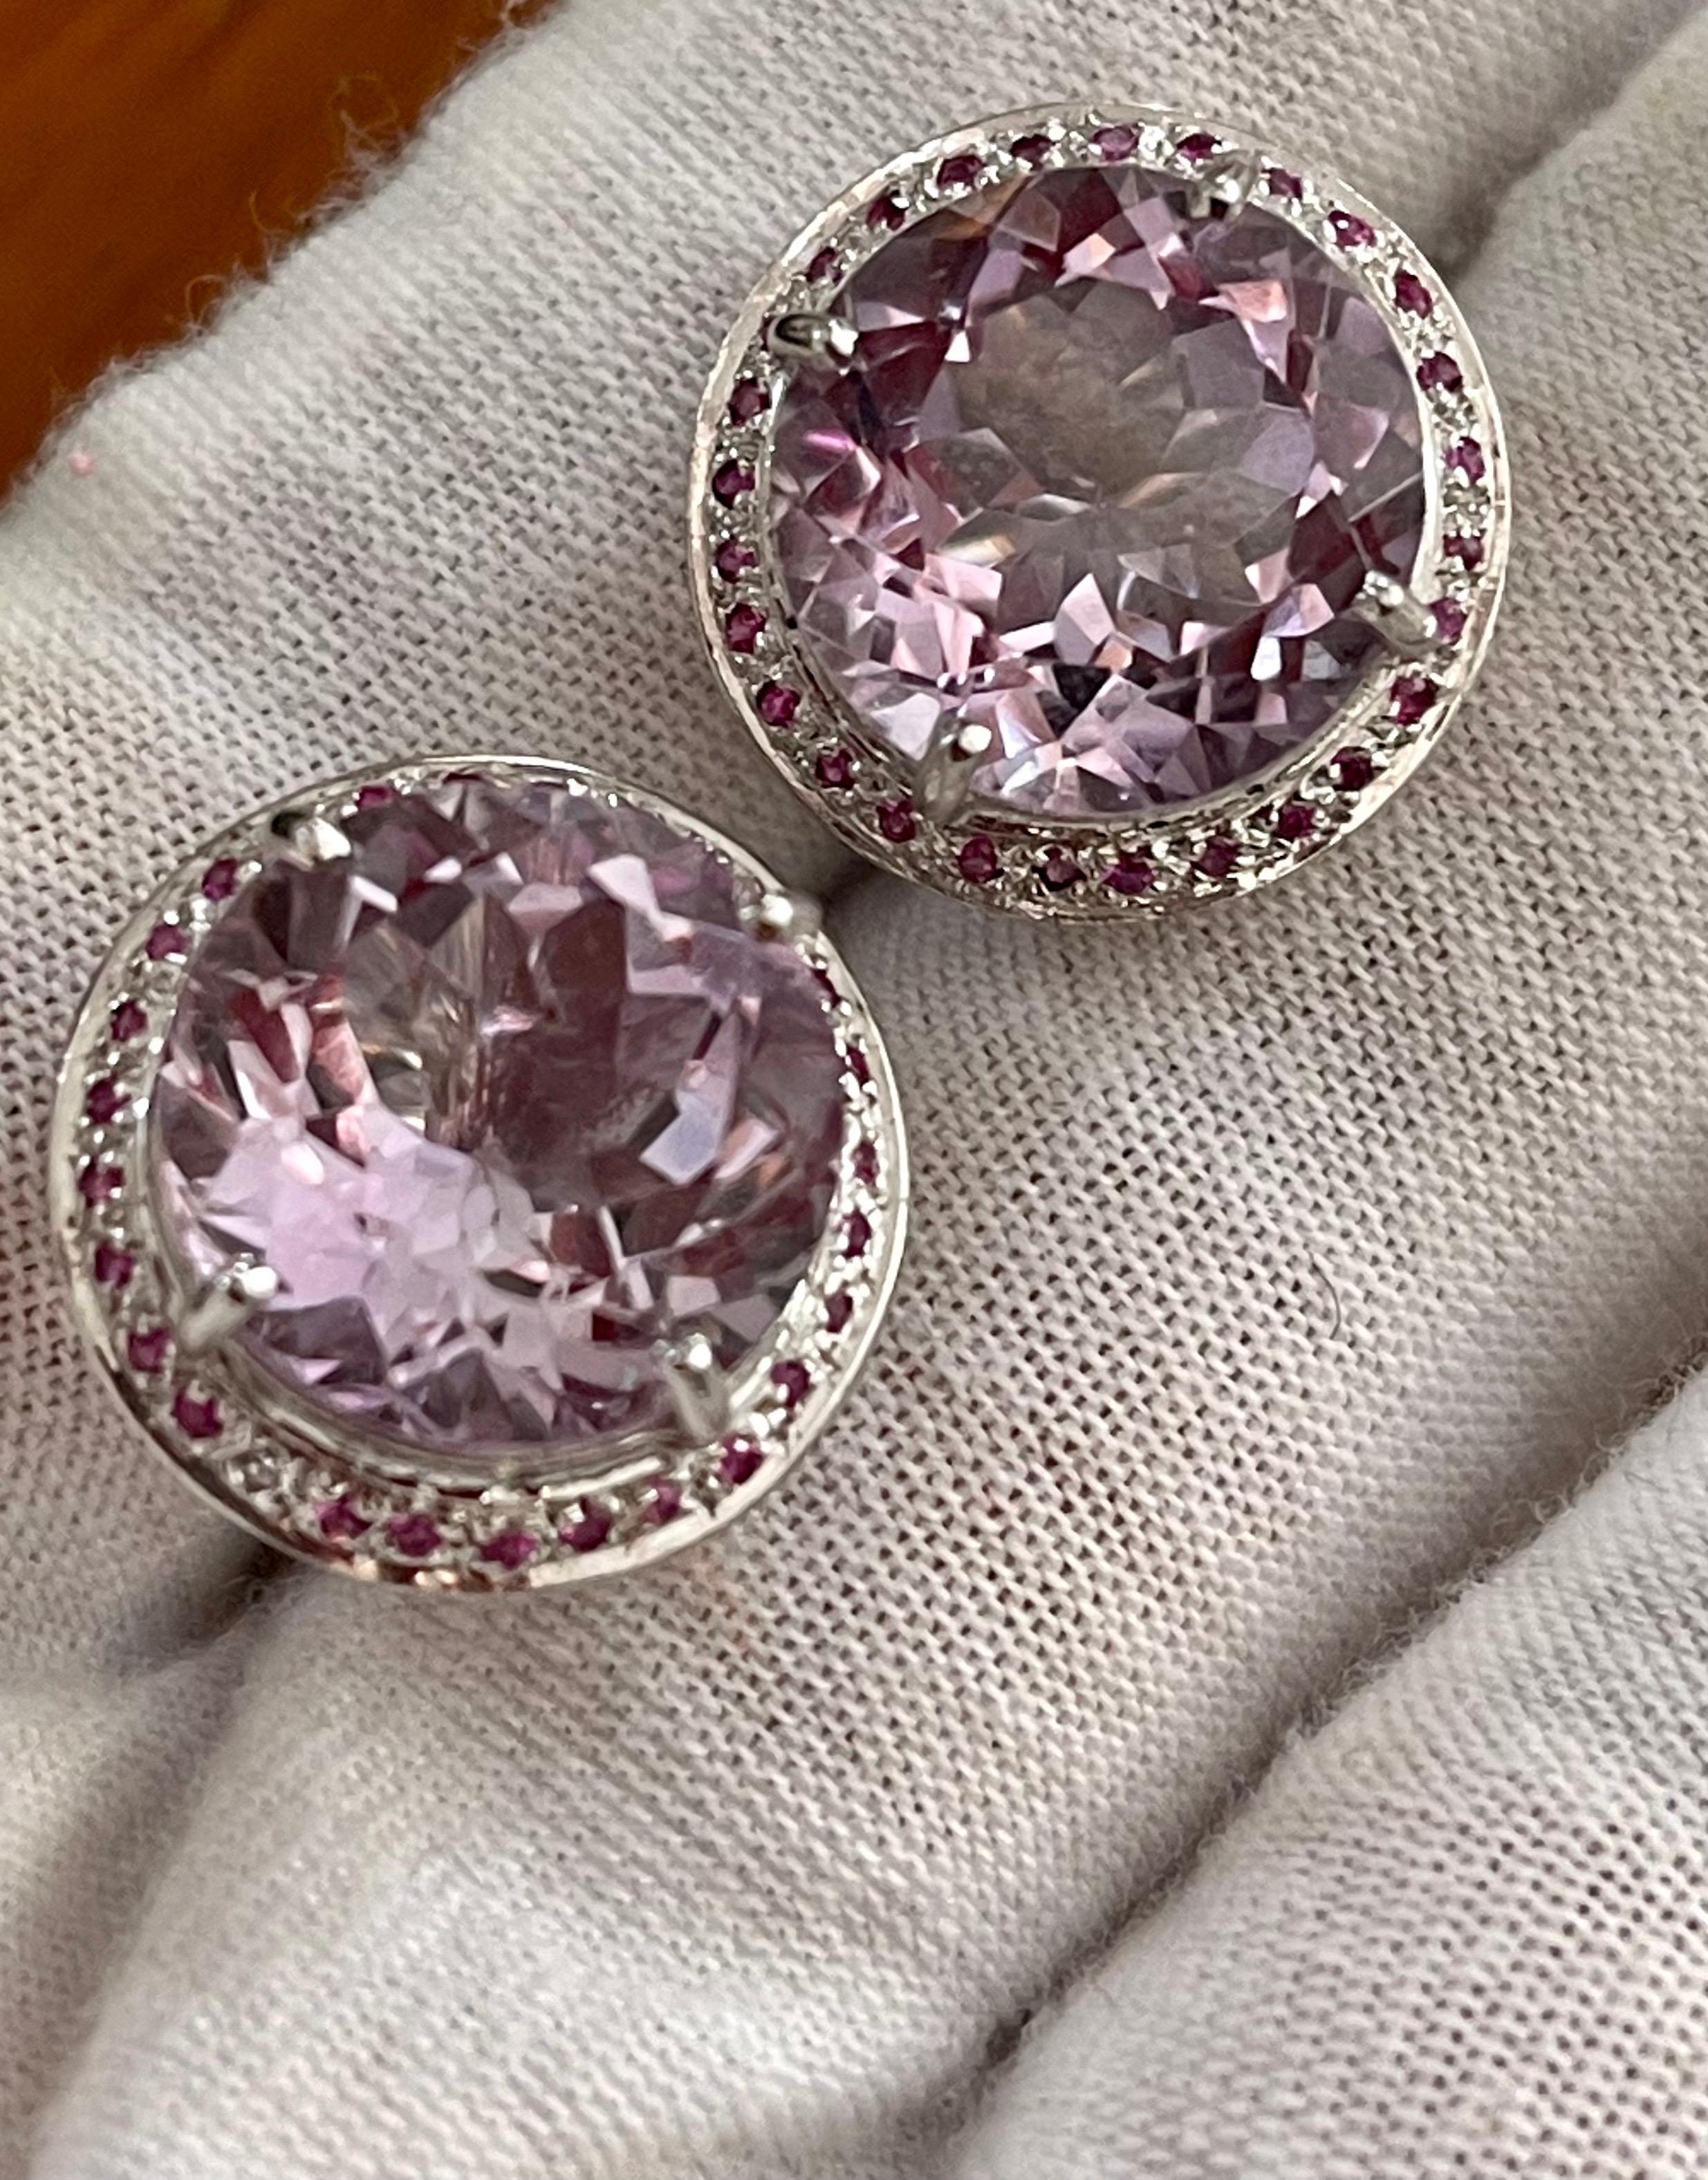 24 Ct Round Natural Pink Amethyst Earrings 18 Karat White Gold Post Backs In Excellent Condition For Sale In New York, NY